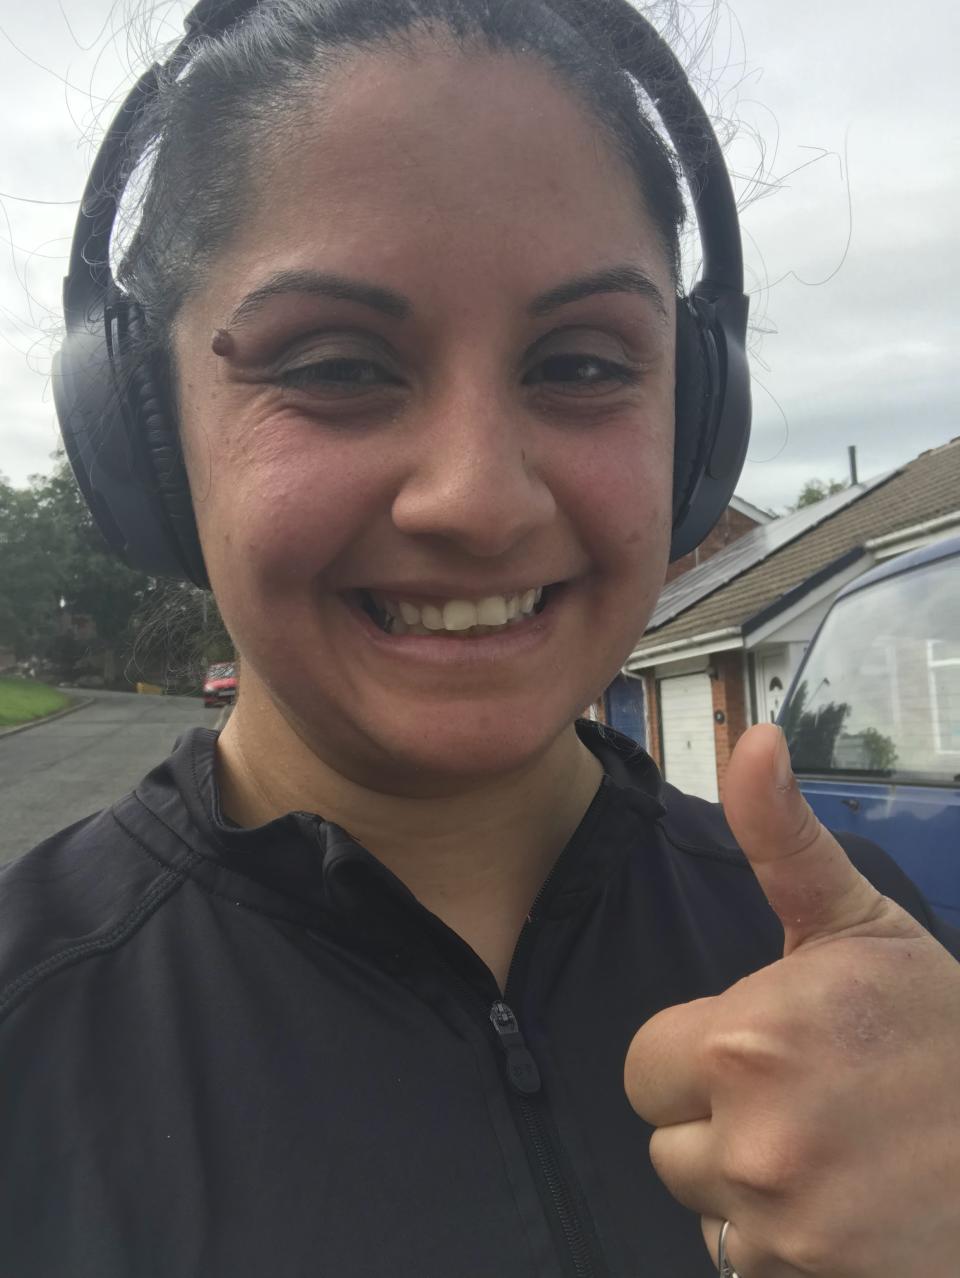 Sanam Saleh gives a thumbs up while wearing a running top and headphones